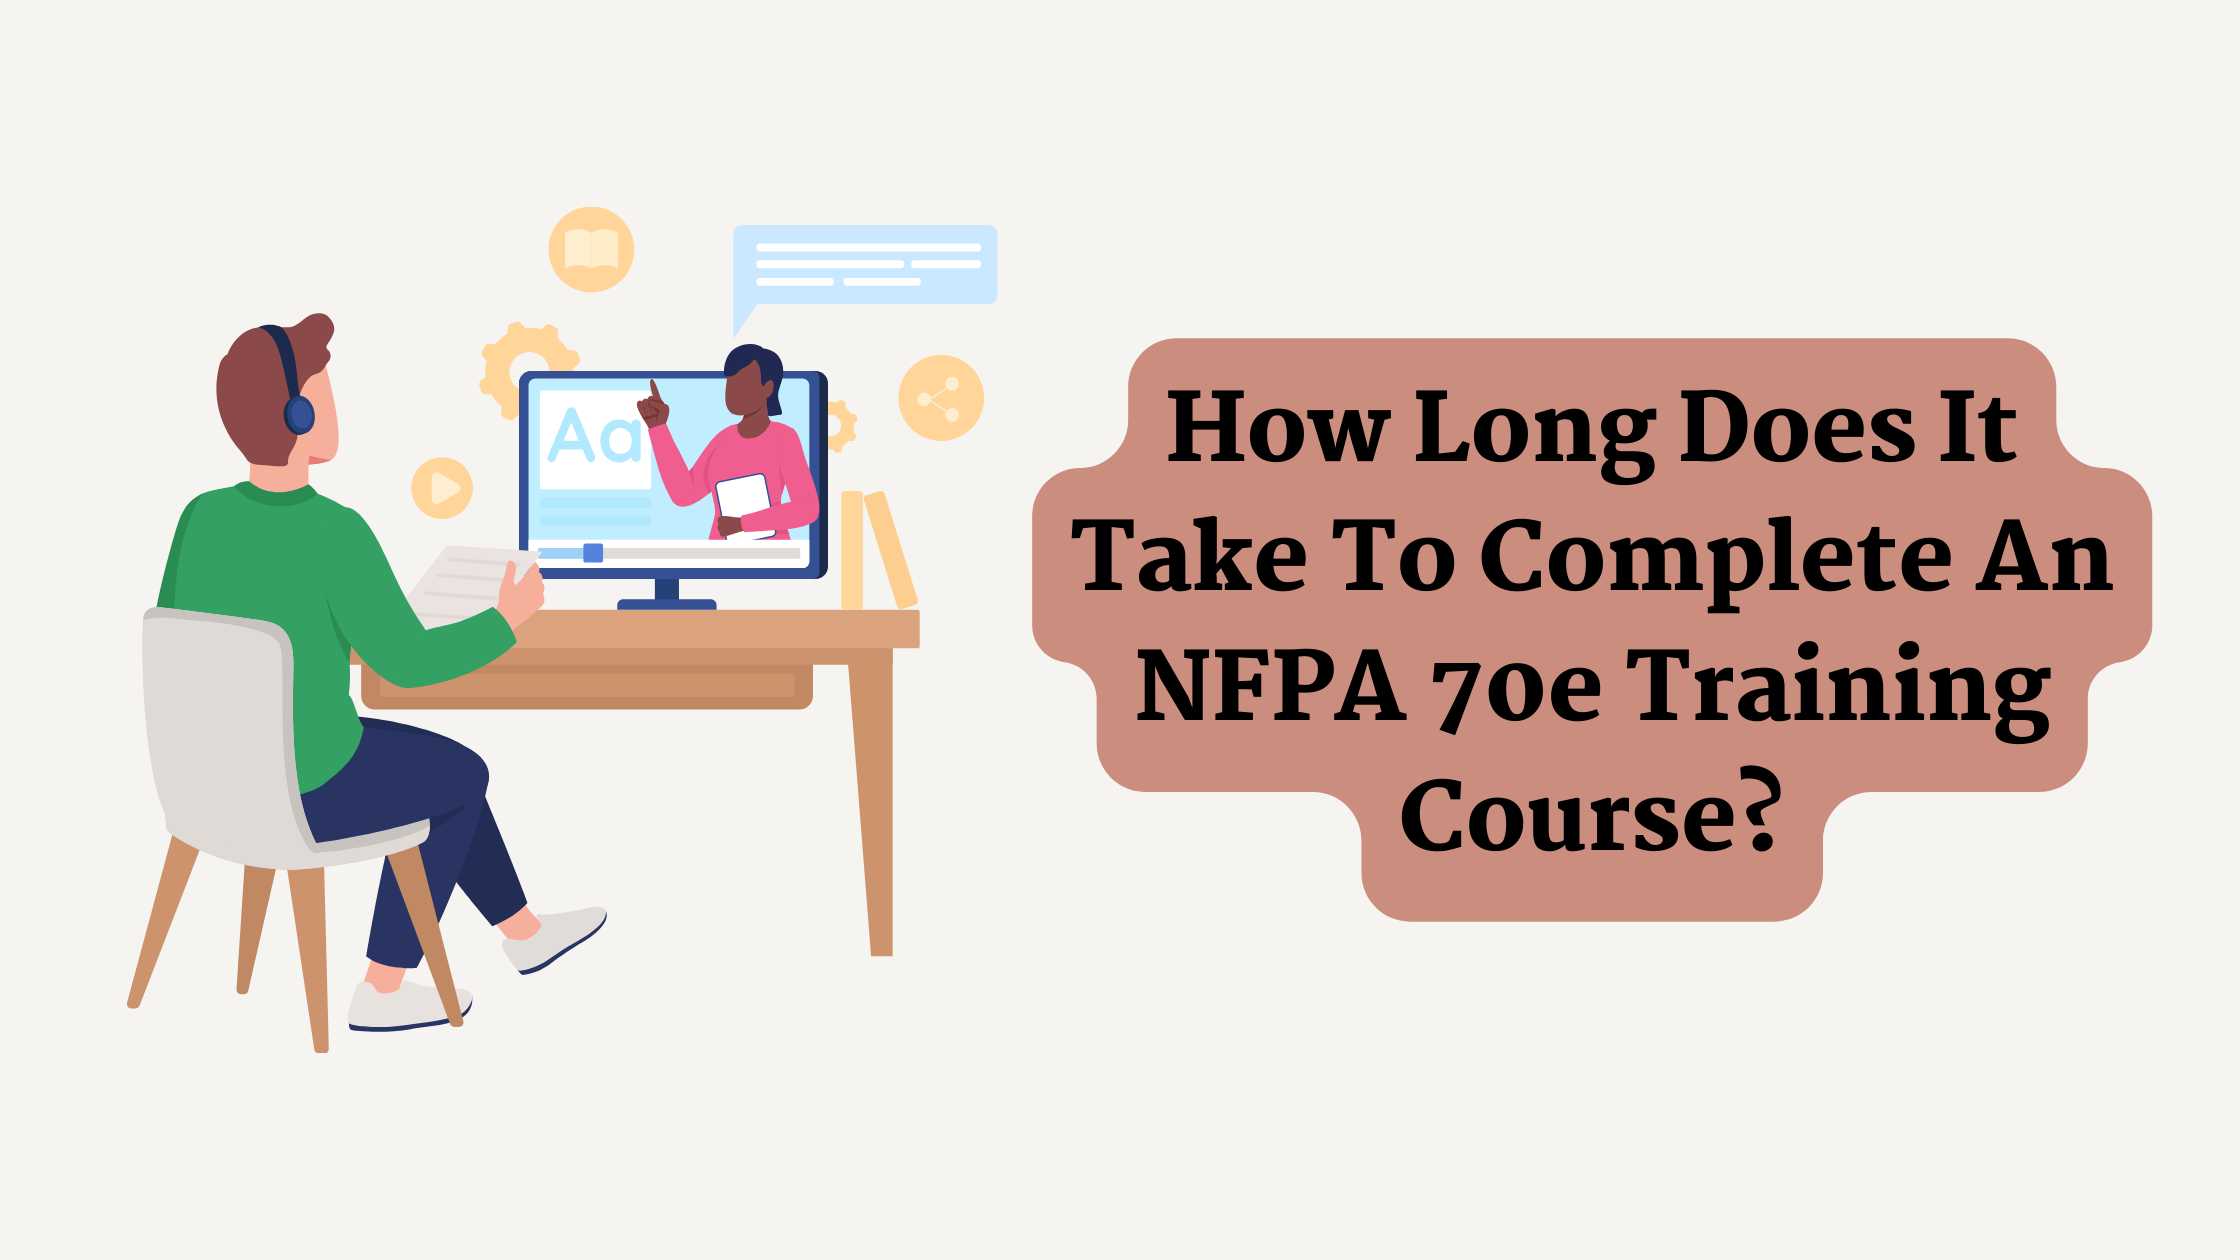 How Long Does It Take To Complete An NFPA 70e Training Course?